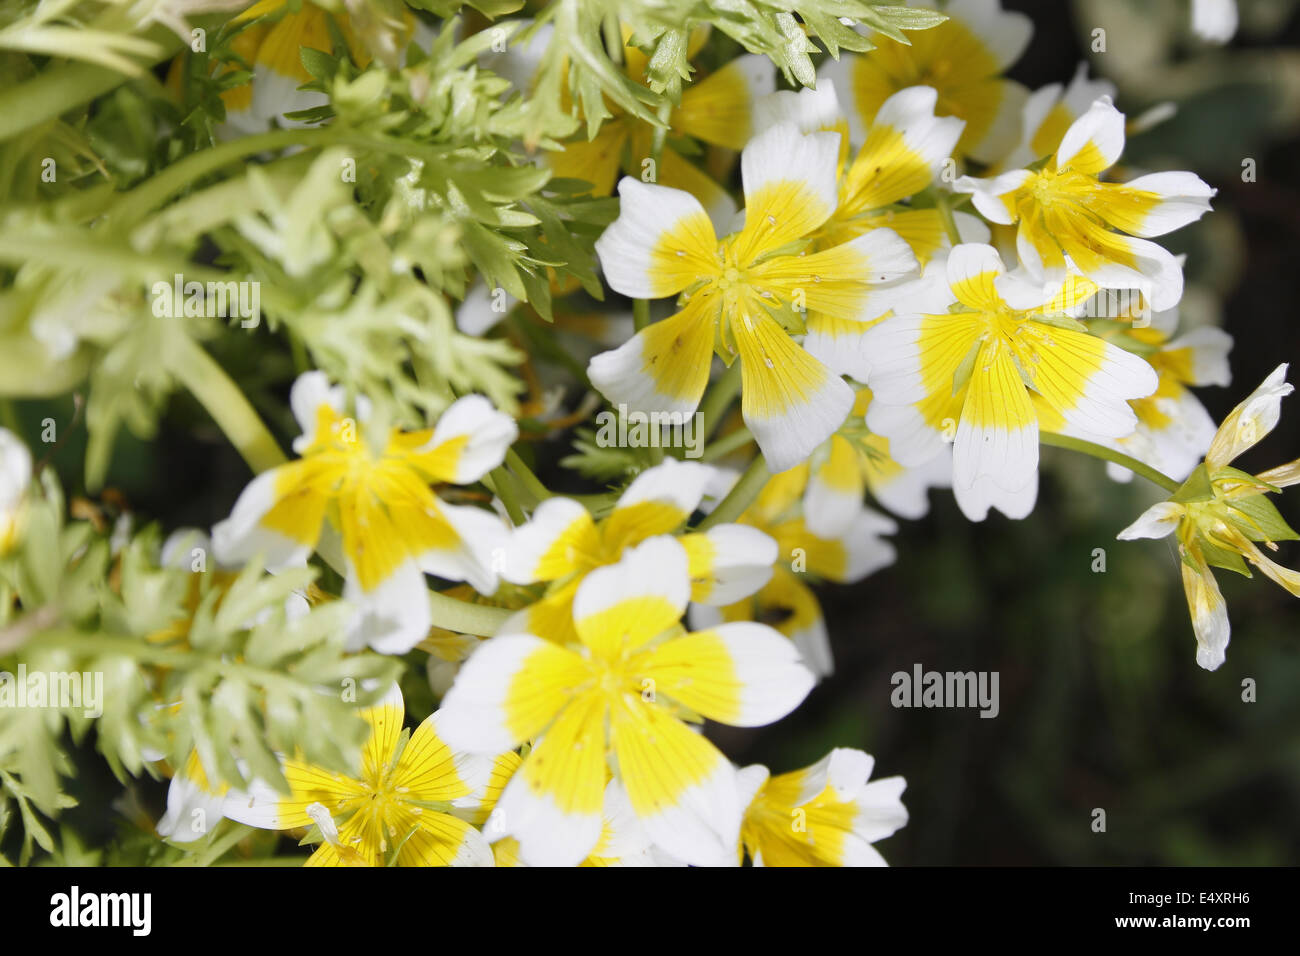 poacehd egg plant flowers in garden Limnanthes douglasii Stock Photo